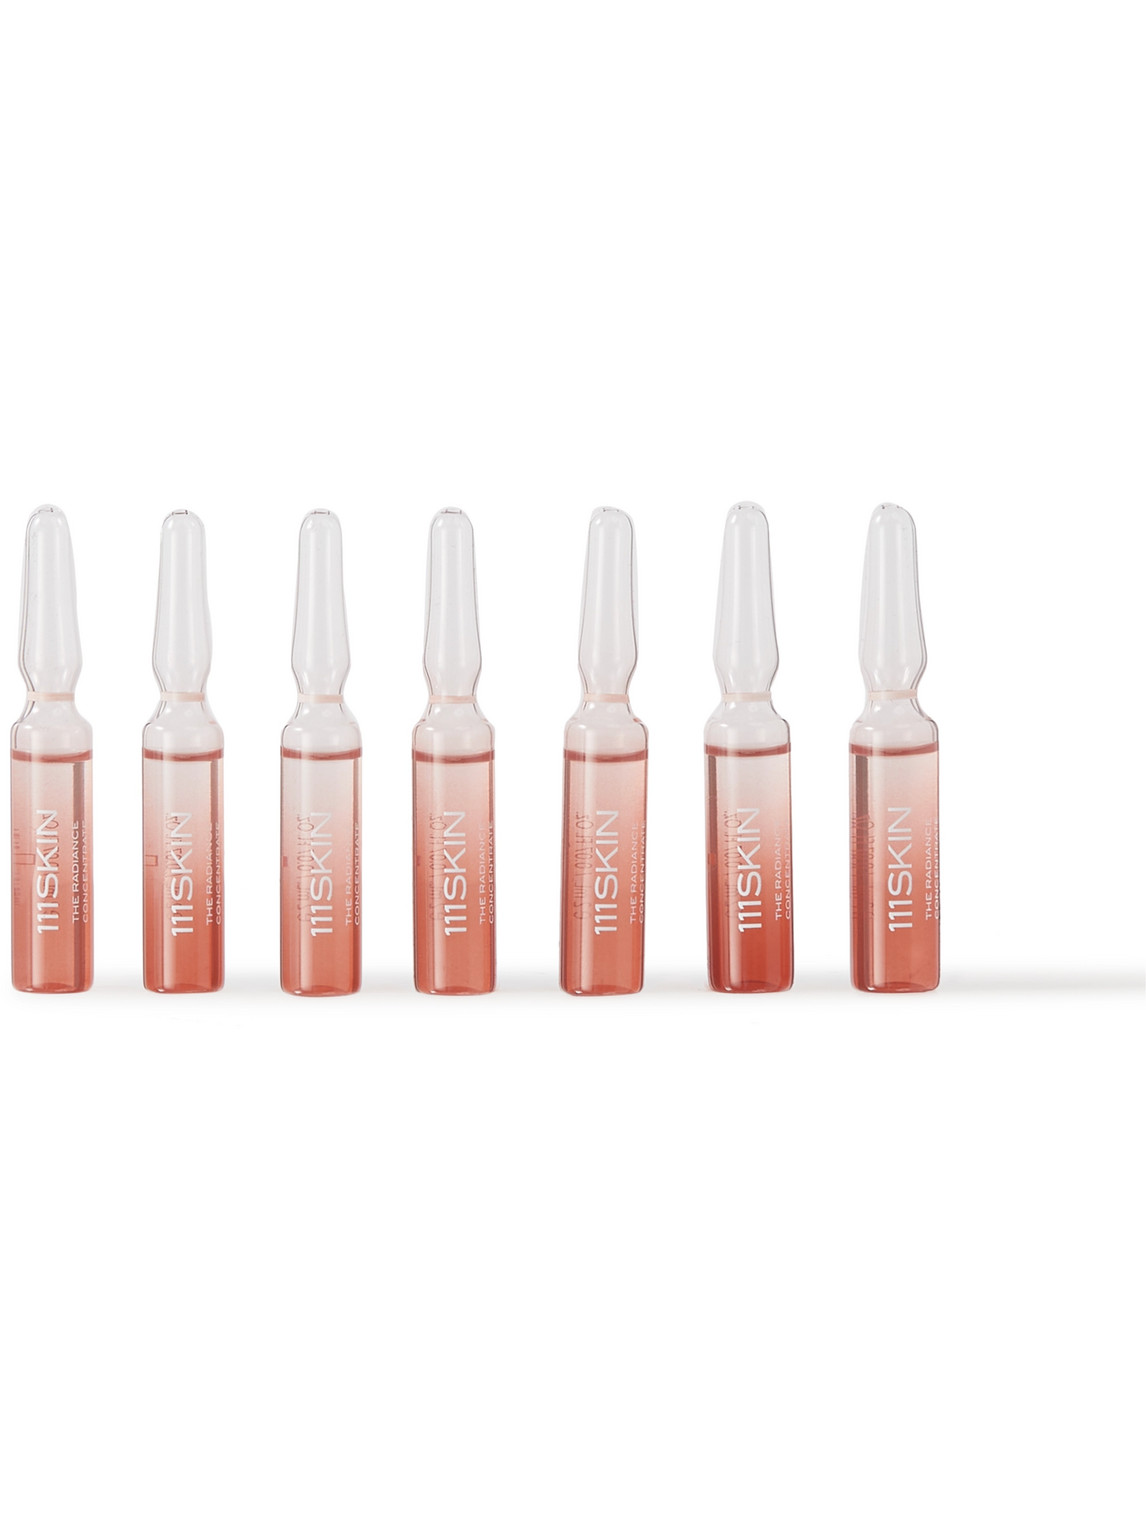 111skin The Radiance Concentrate, 7 X 2ml In Colorless